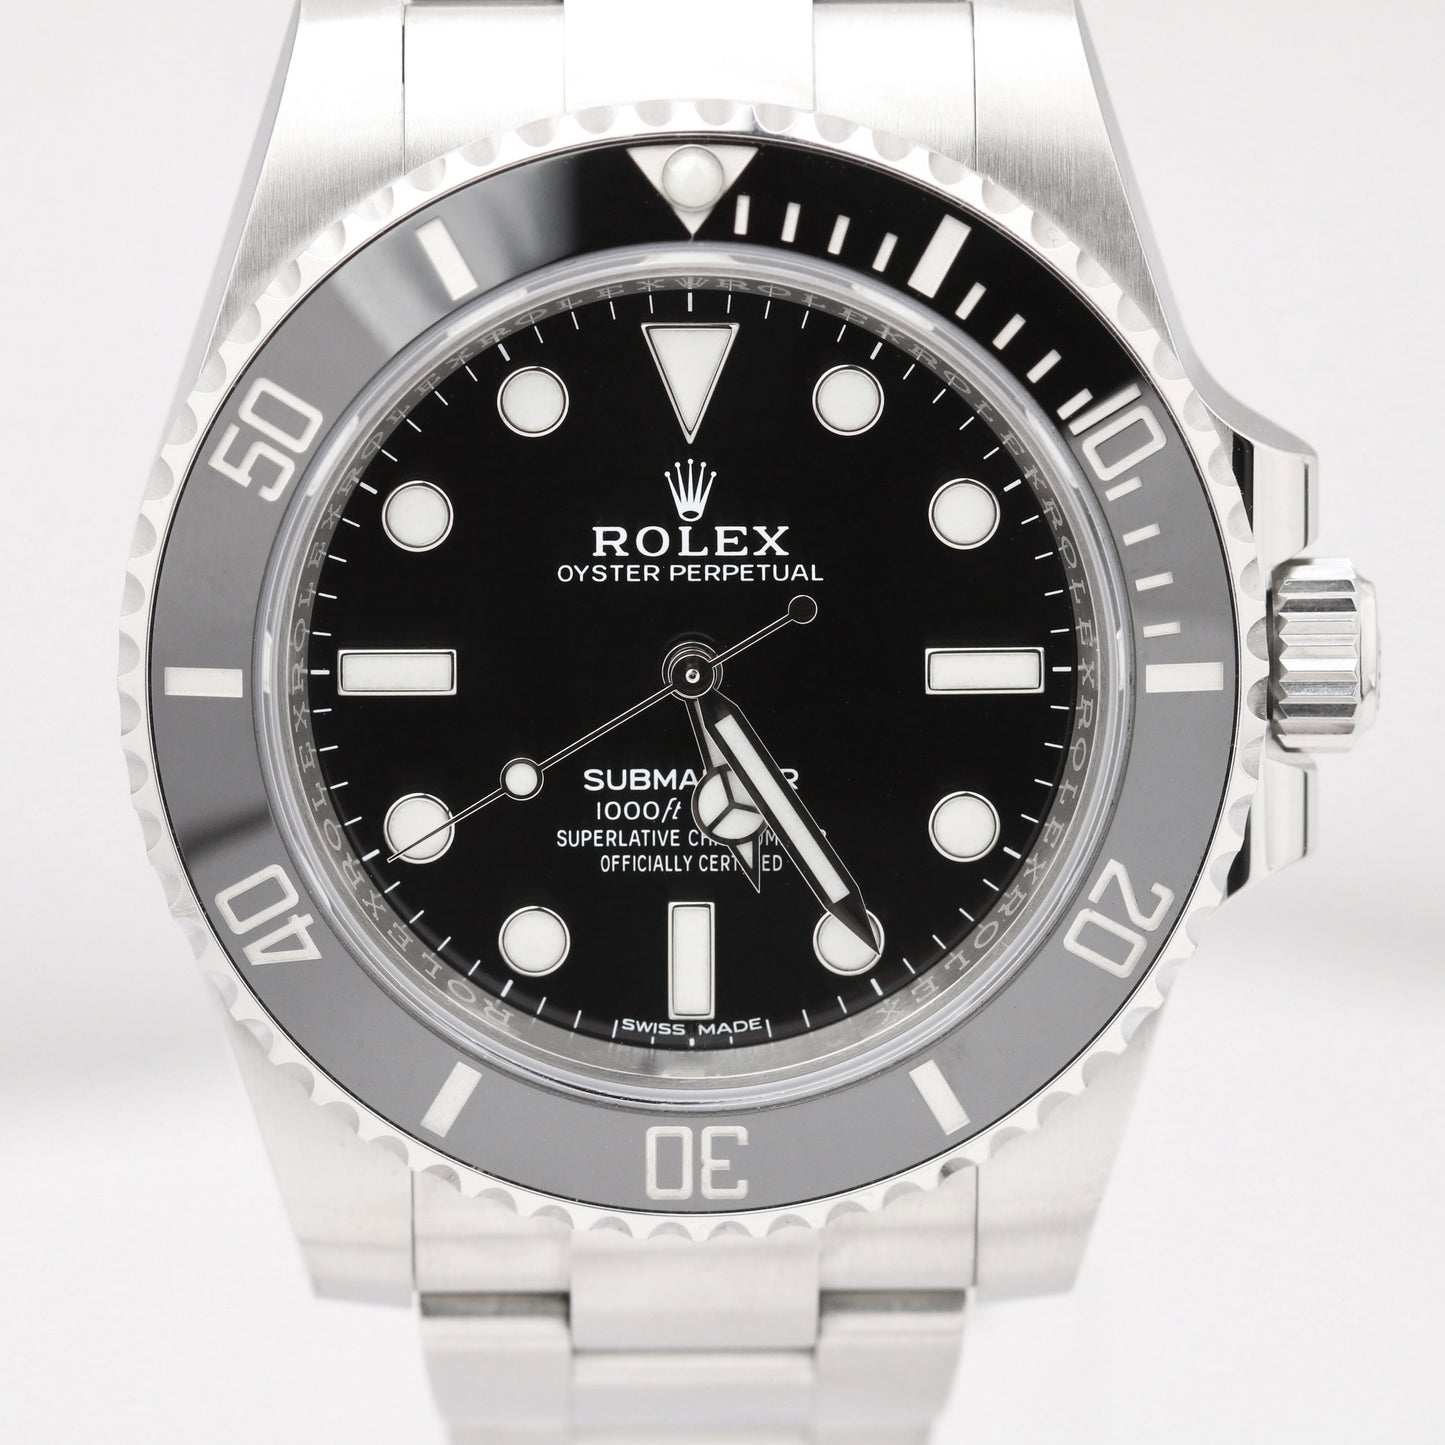 RARE 2022 NEW CARD Rolex Submariner 114060 Ceramic 40mm No-Date Stainless Watch